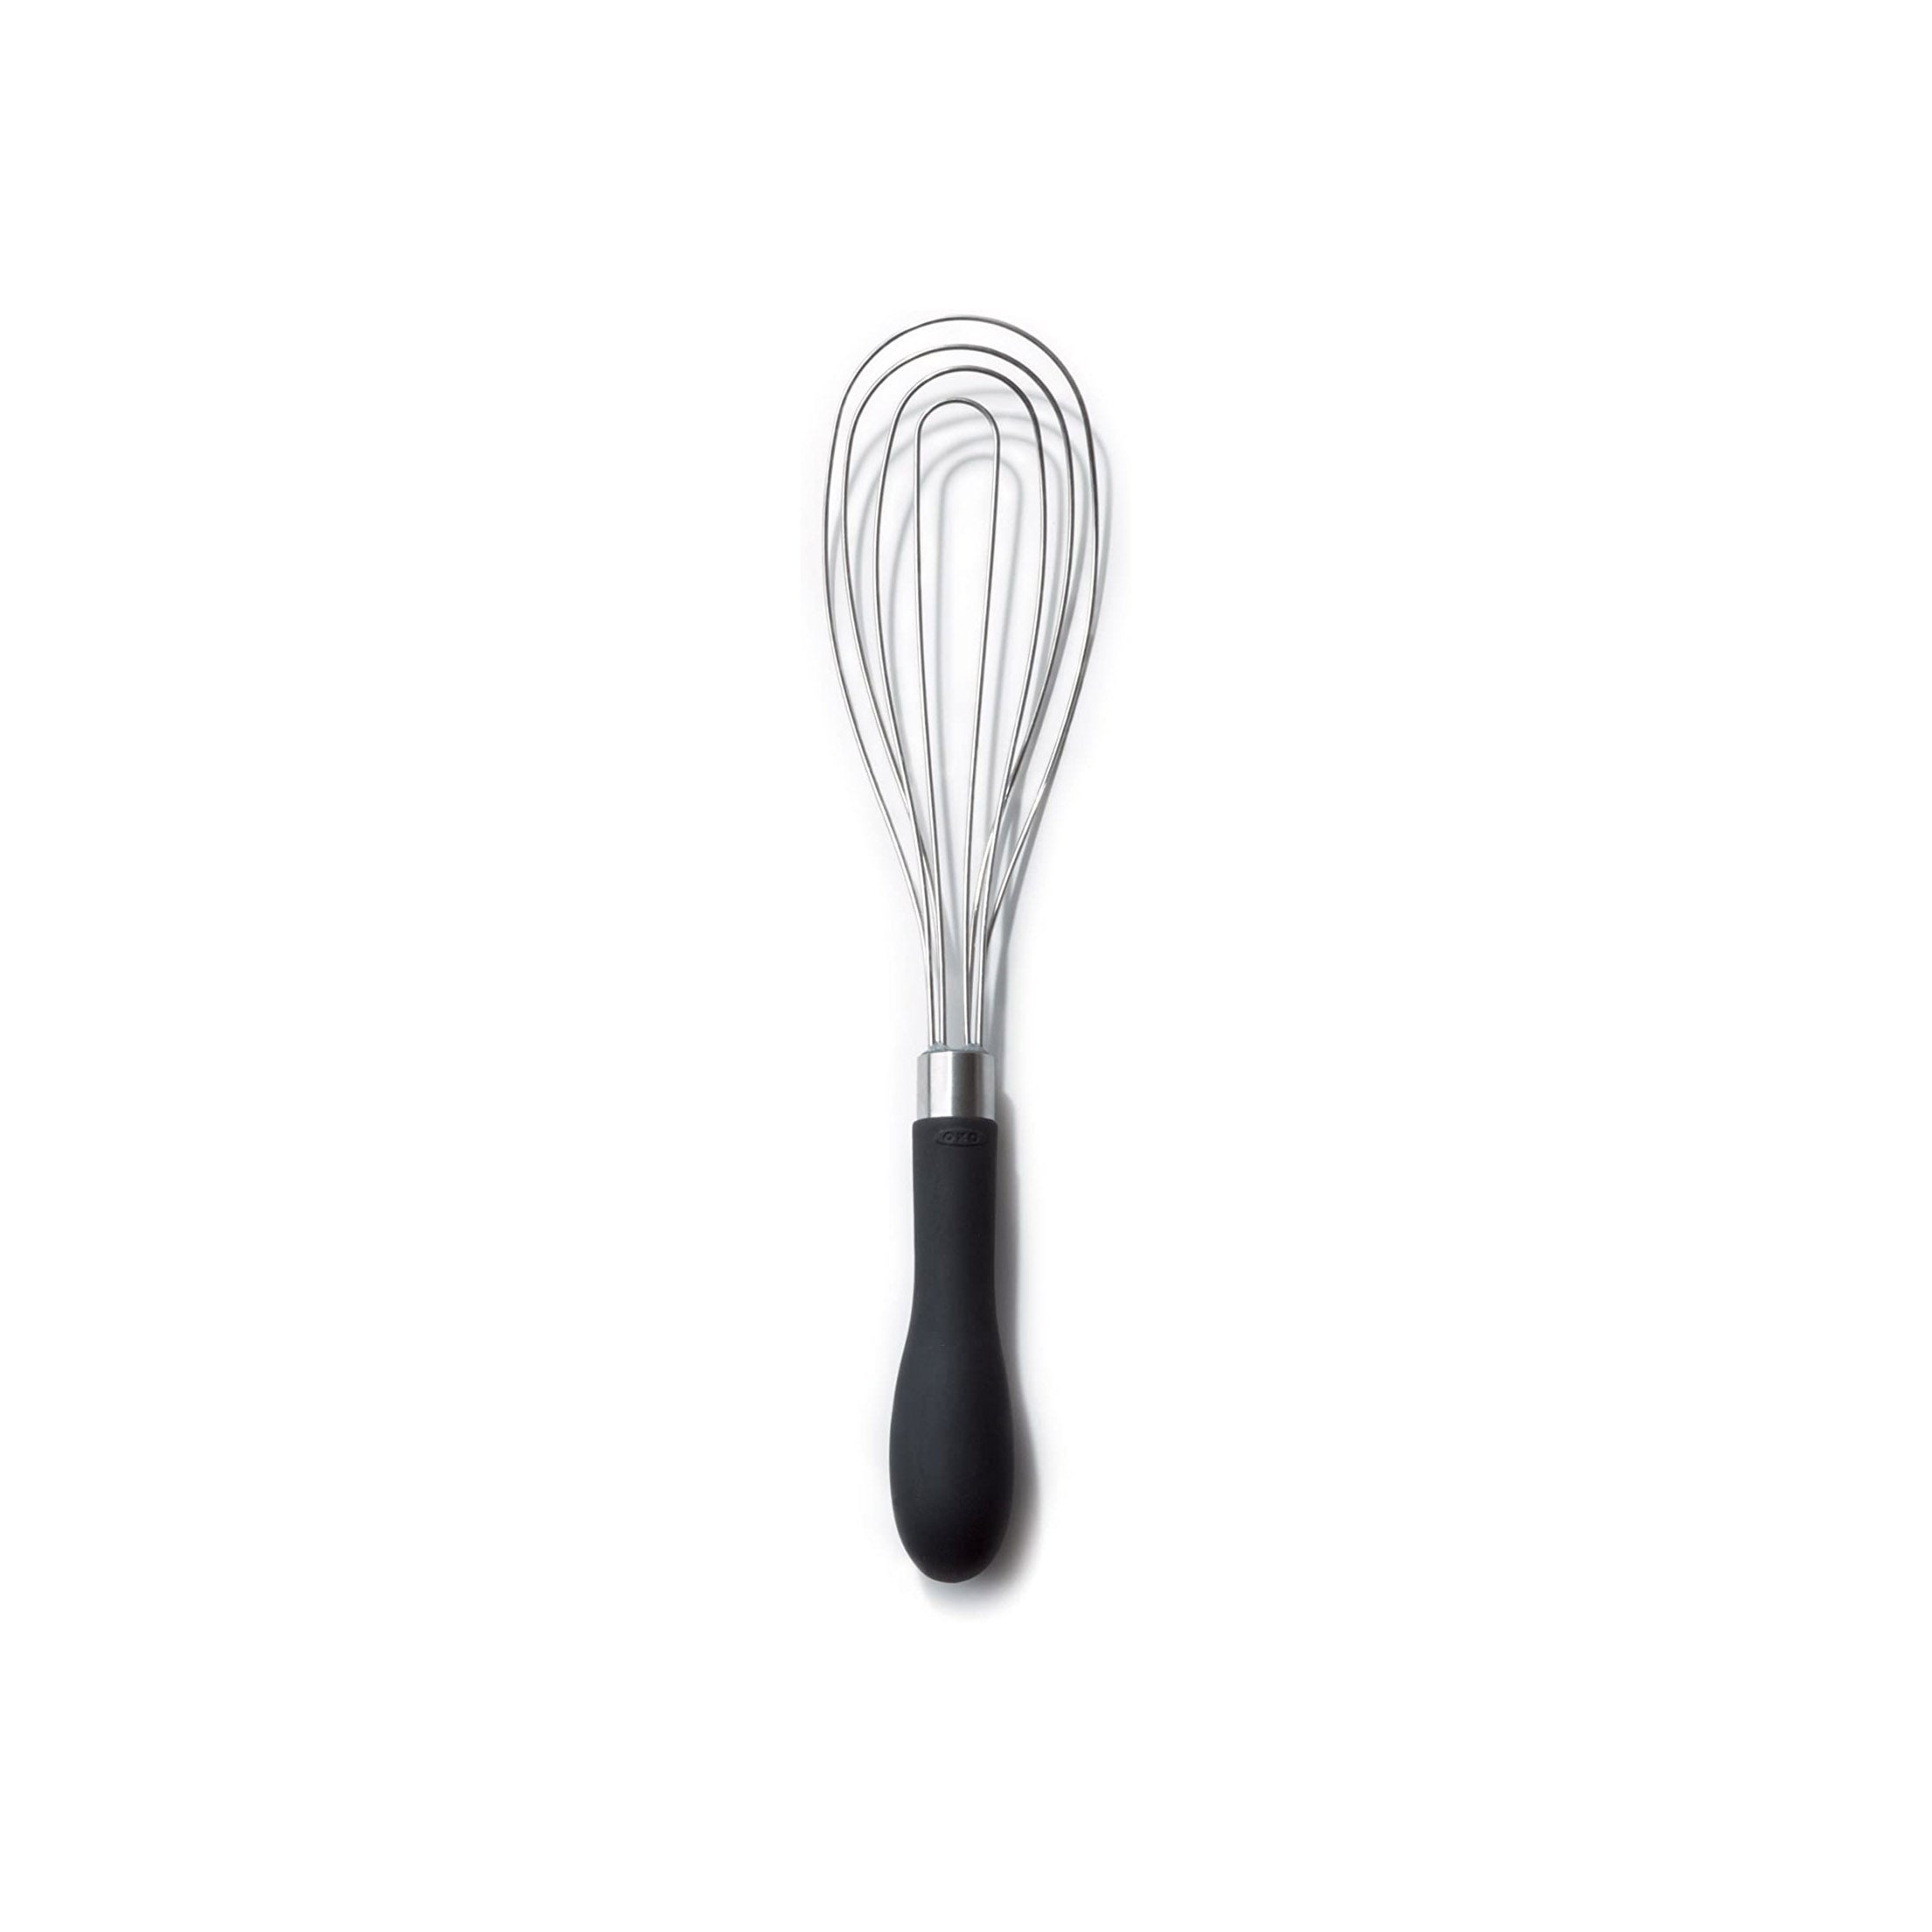 Best Homemade Brand 10 inch Coil Wire Whisk